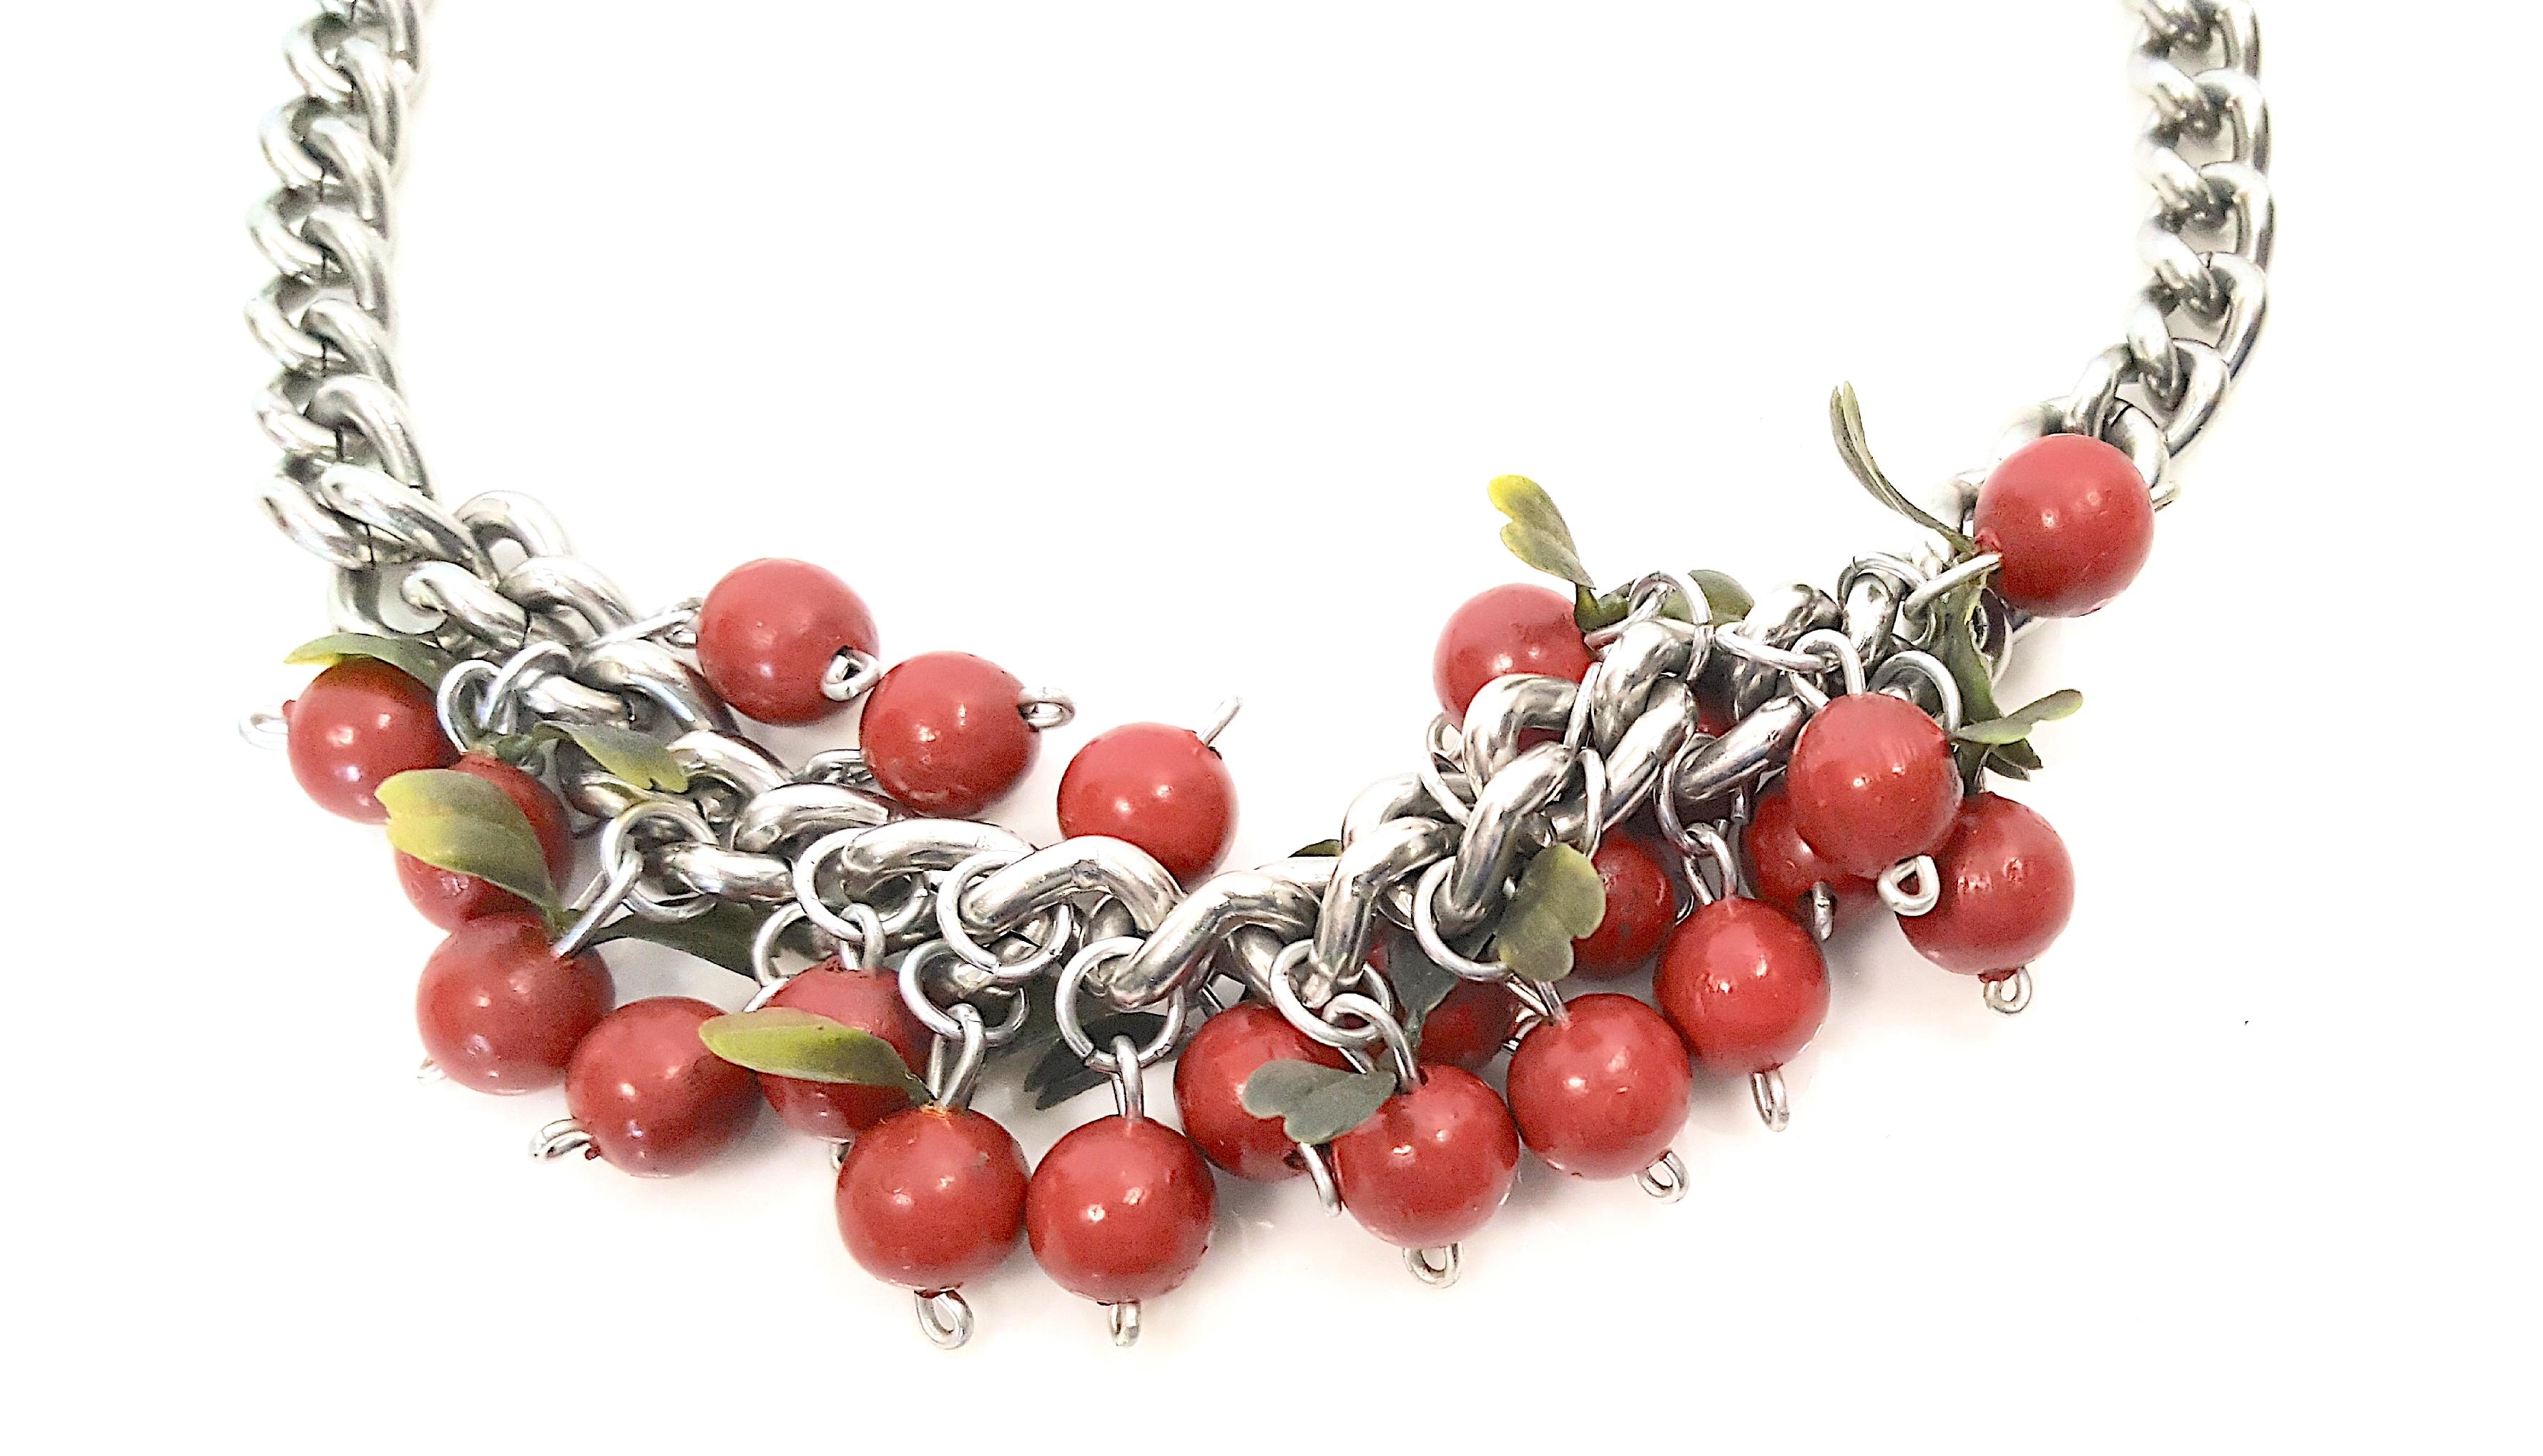 This vintage cherry-fruit charm necklace featuring red hand-painted wood is constructed of silver chain links and its clasp extension-chain is decorated with a single red bead. The green leaves that trim the fruit beads are a surprising two-tone